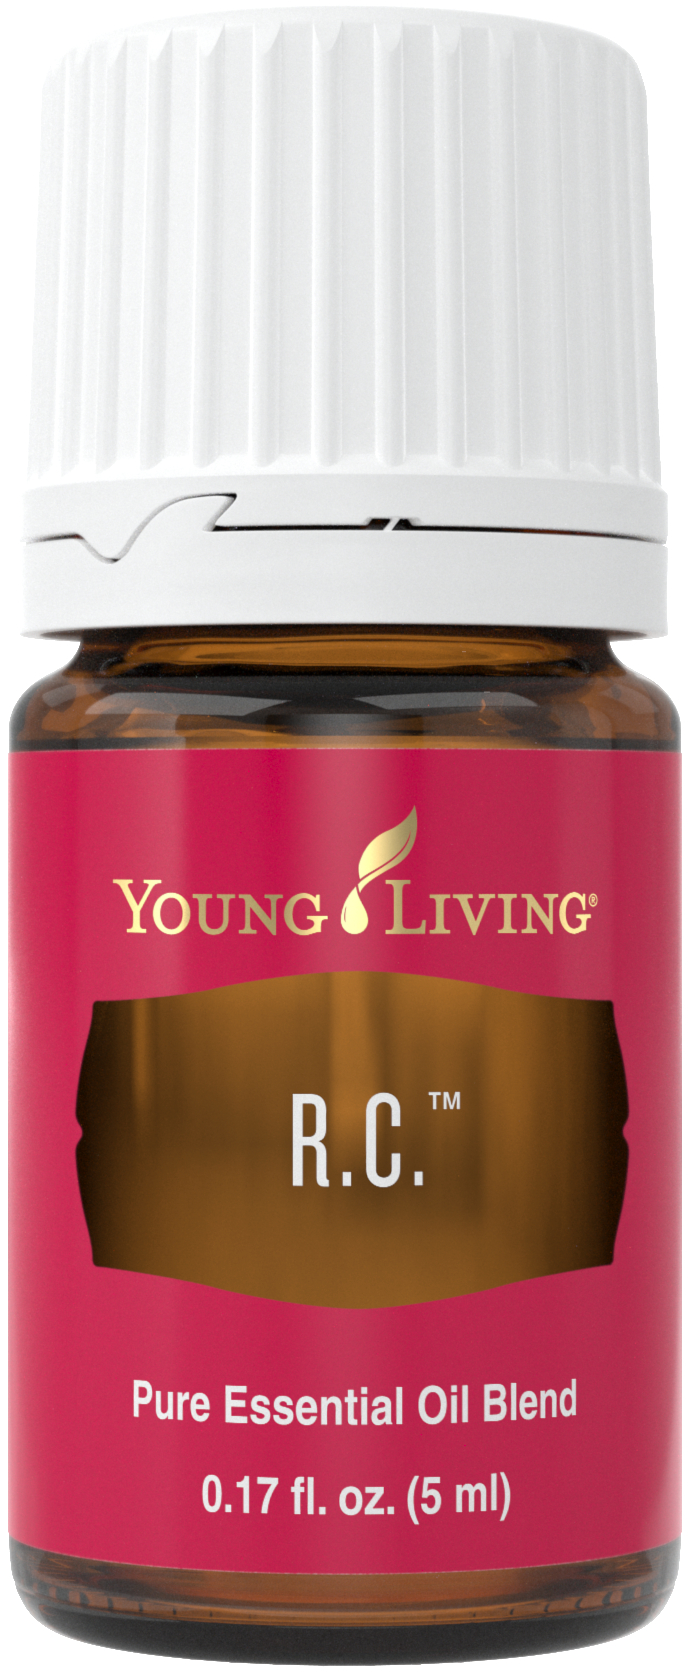 R.C. Essential Oil Blend - Young Living Essential Oils